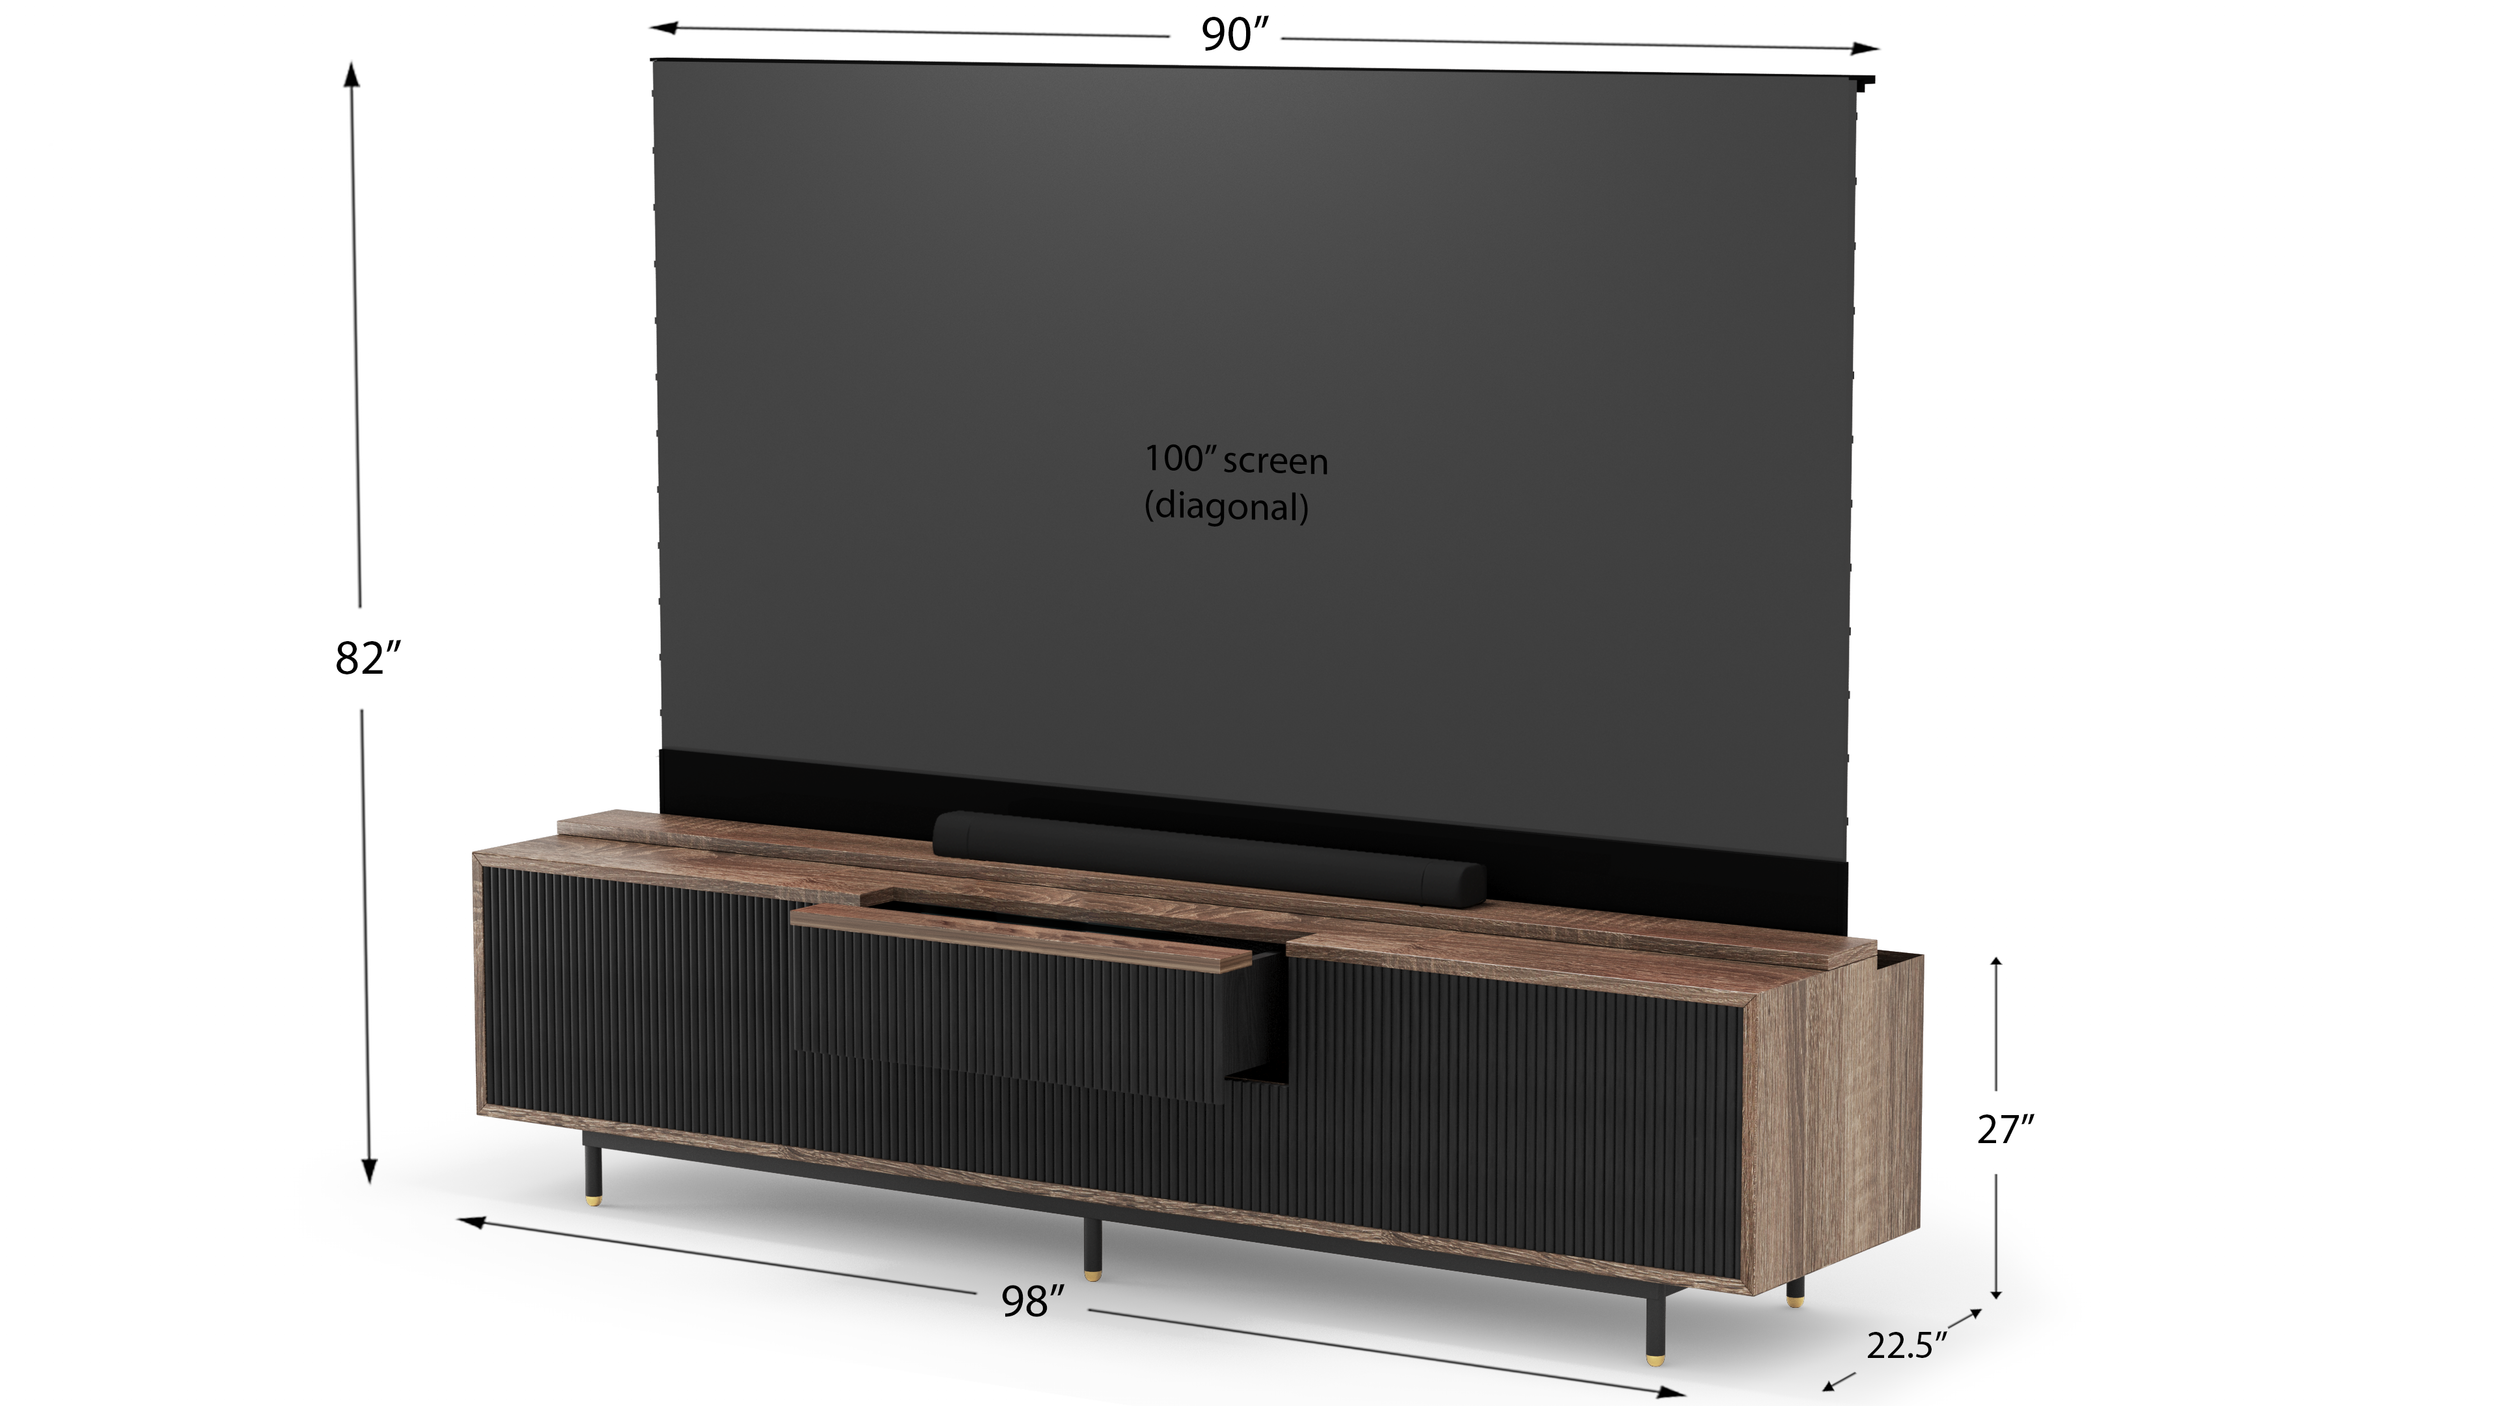 Render Dimensions 100 inch screen.png